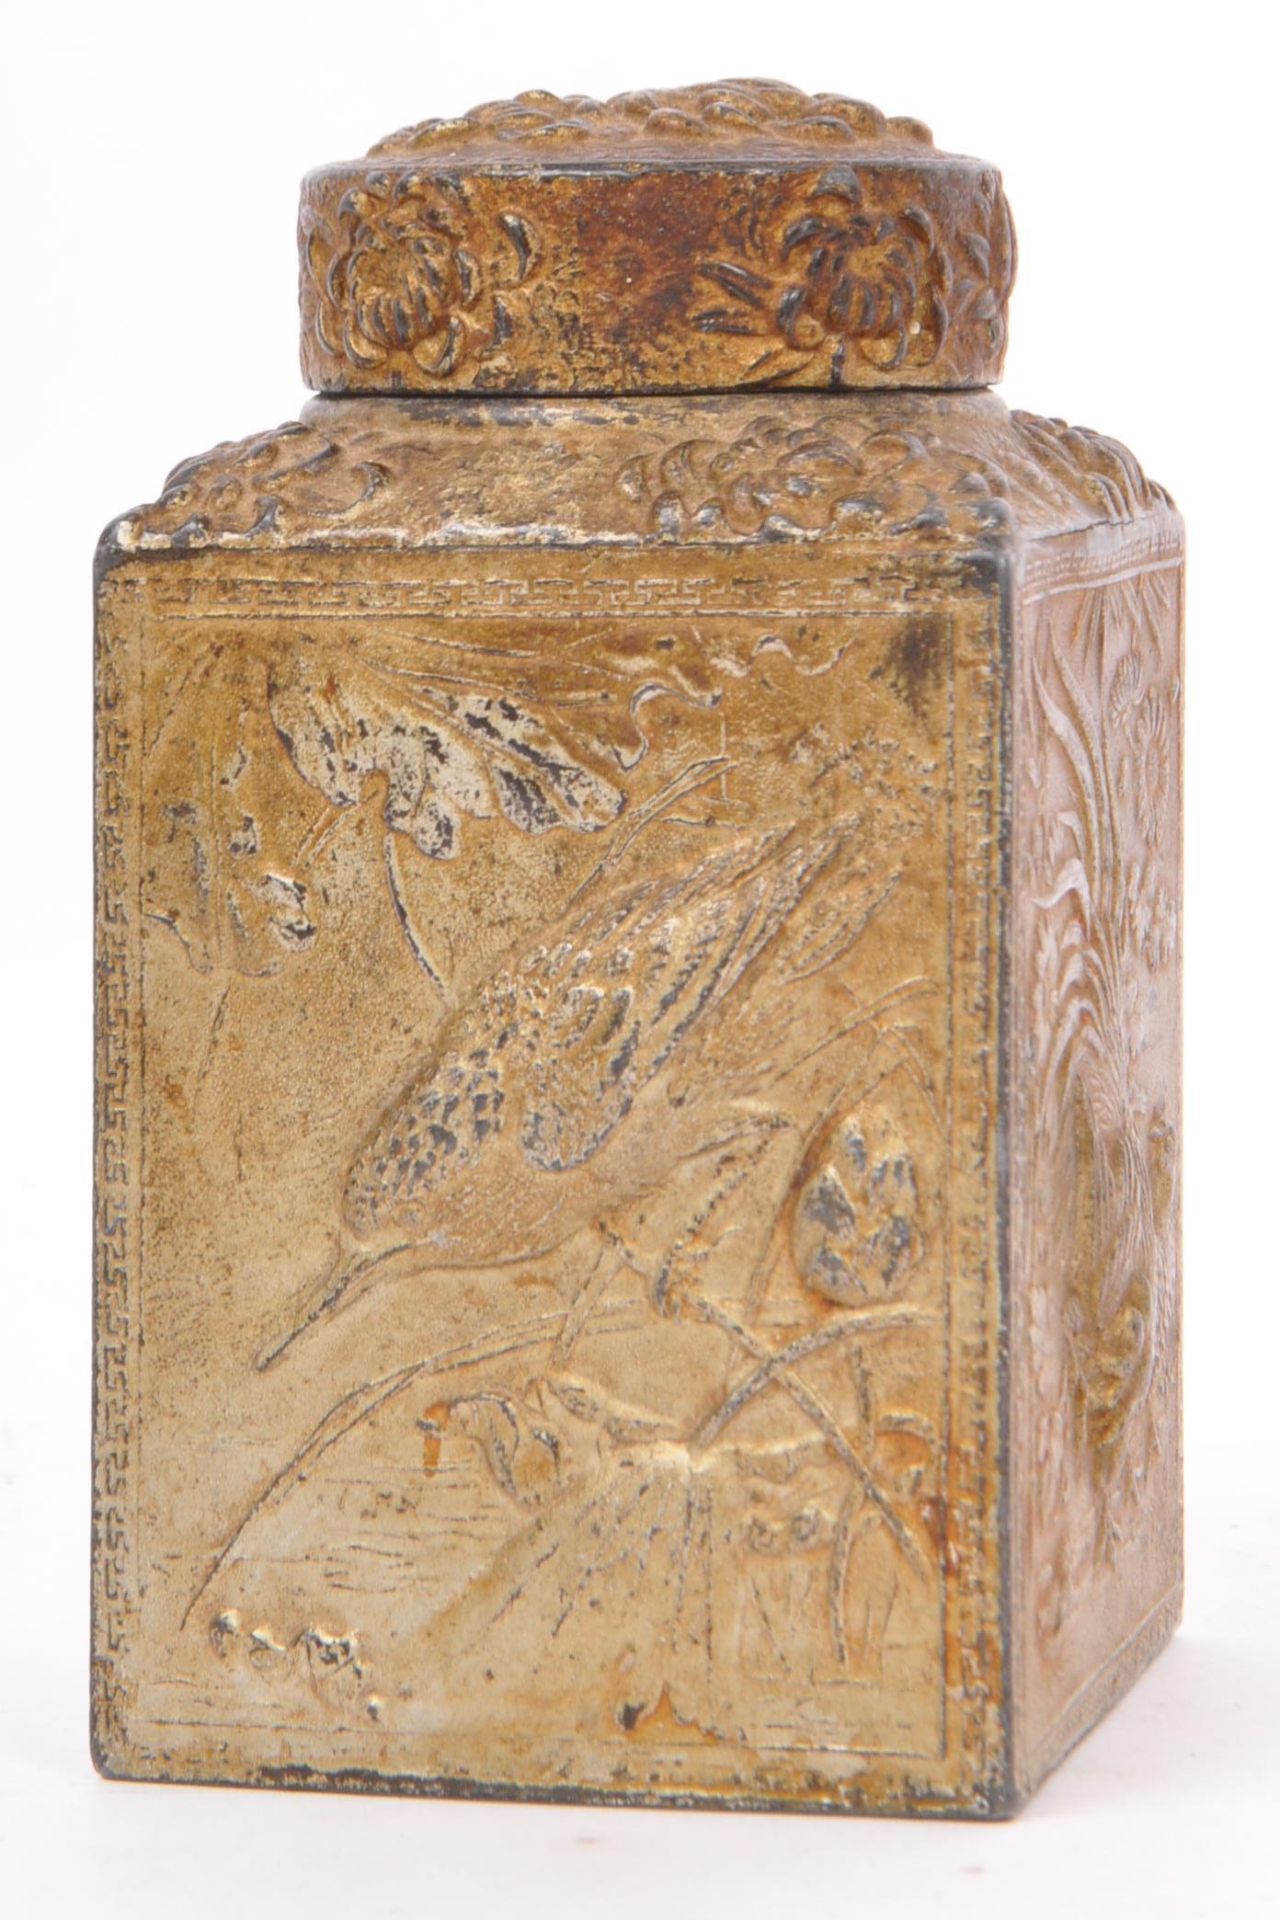 1920S CHINESE GILDED METAL TEA CADDY - BIRD VIGNETTES